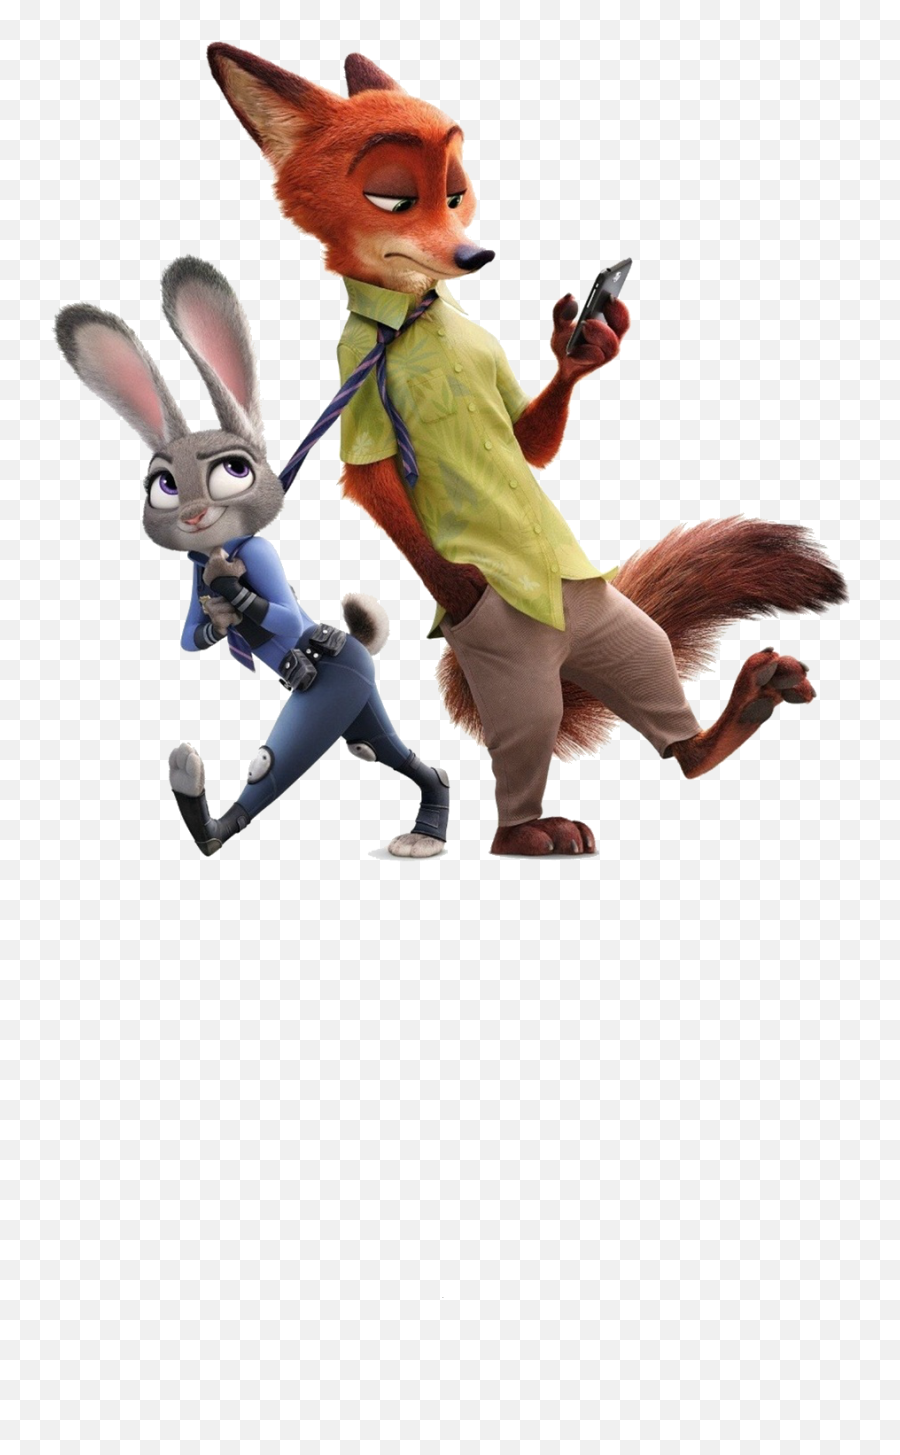 Zootopia Image - Id 154478 Image Abyss Zootopia Couple Png,Judy Hopps Png